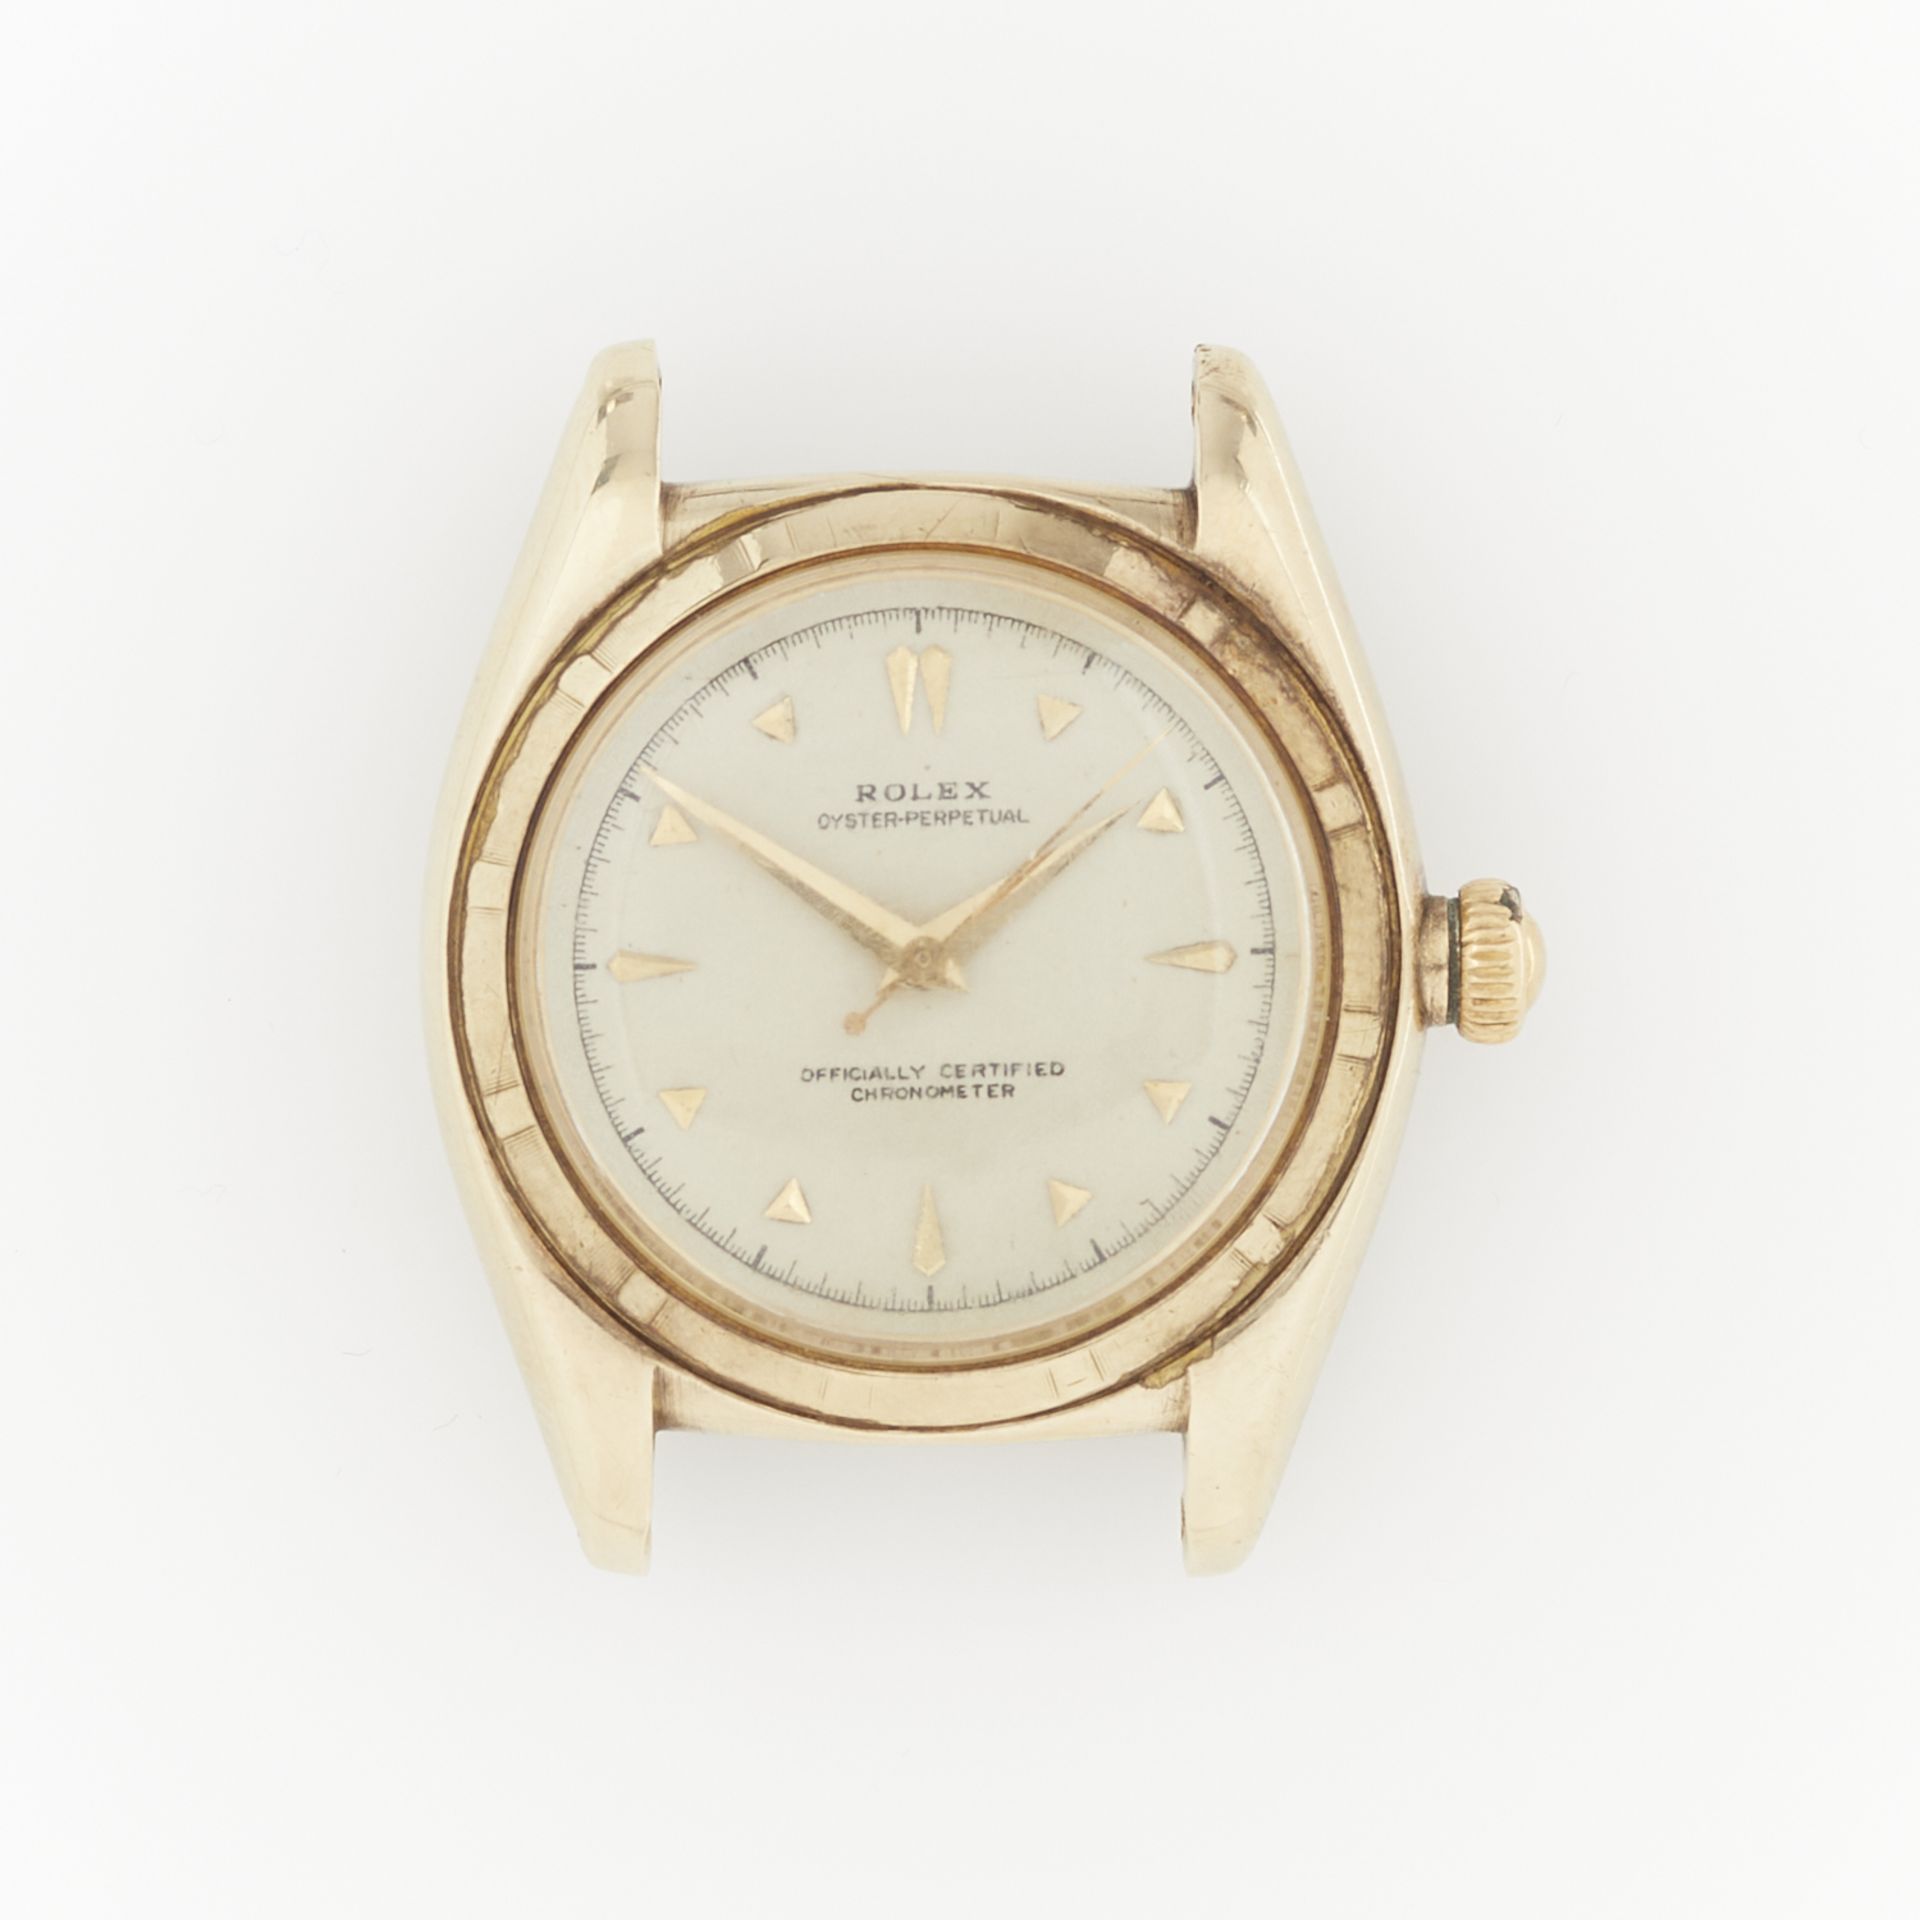 14k Rolex Oyster Perpetual 4777 Bubble Back - Image 3 of 14